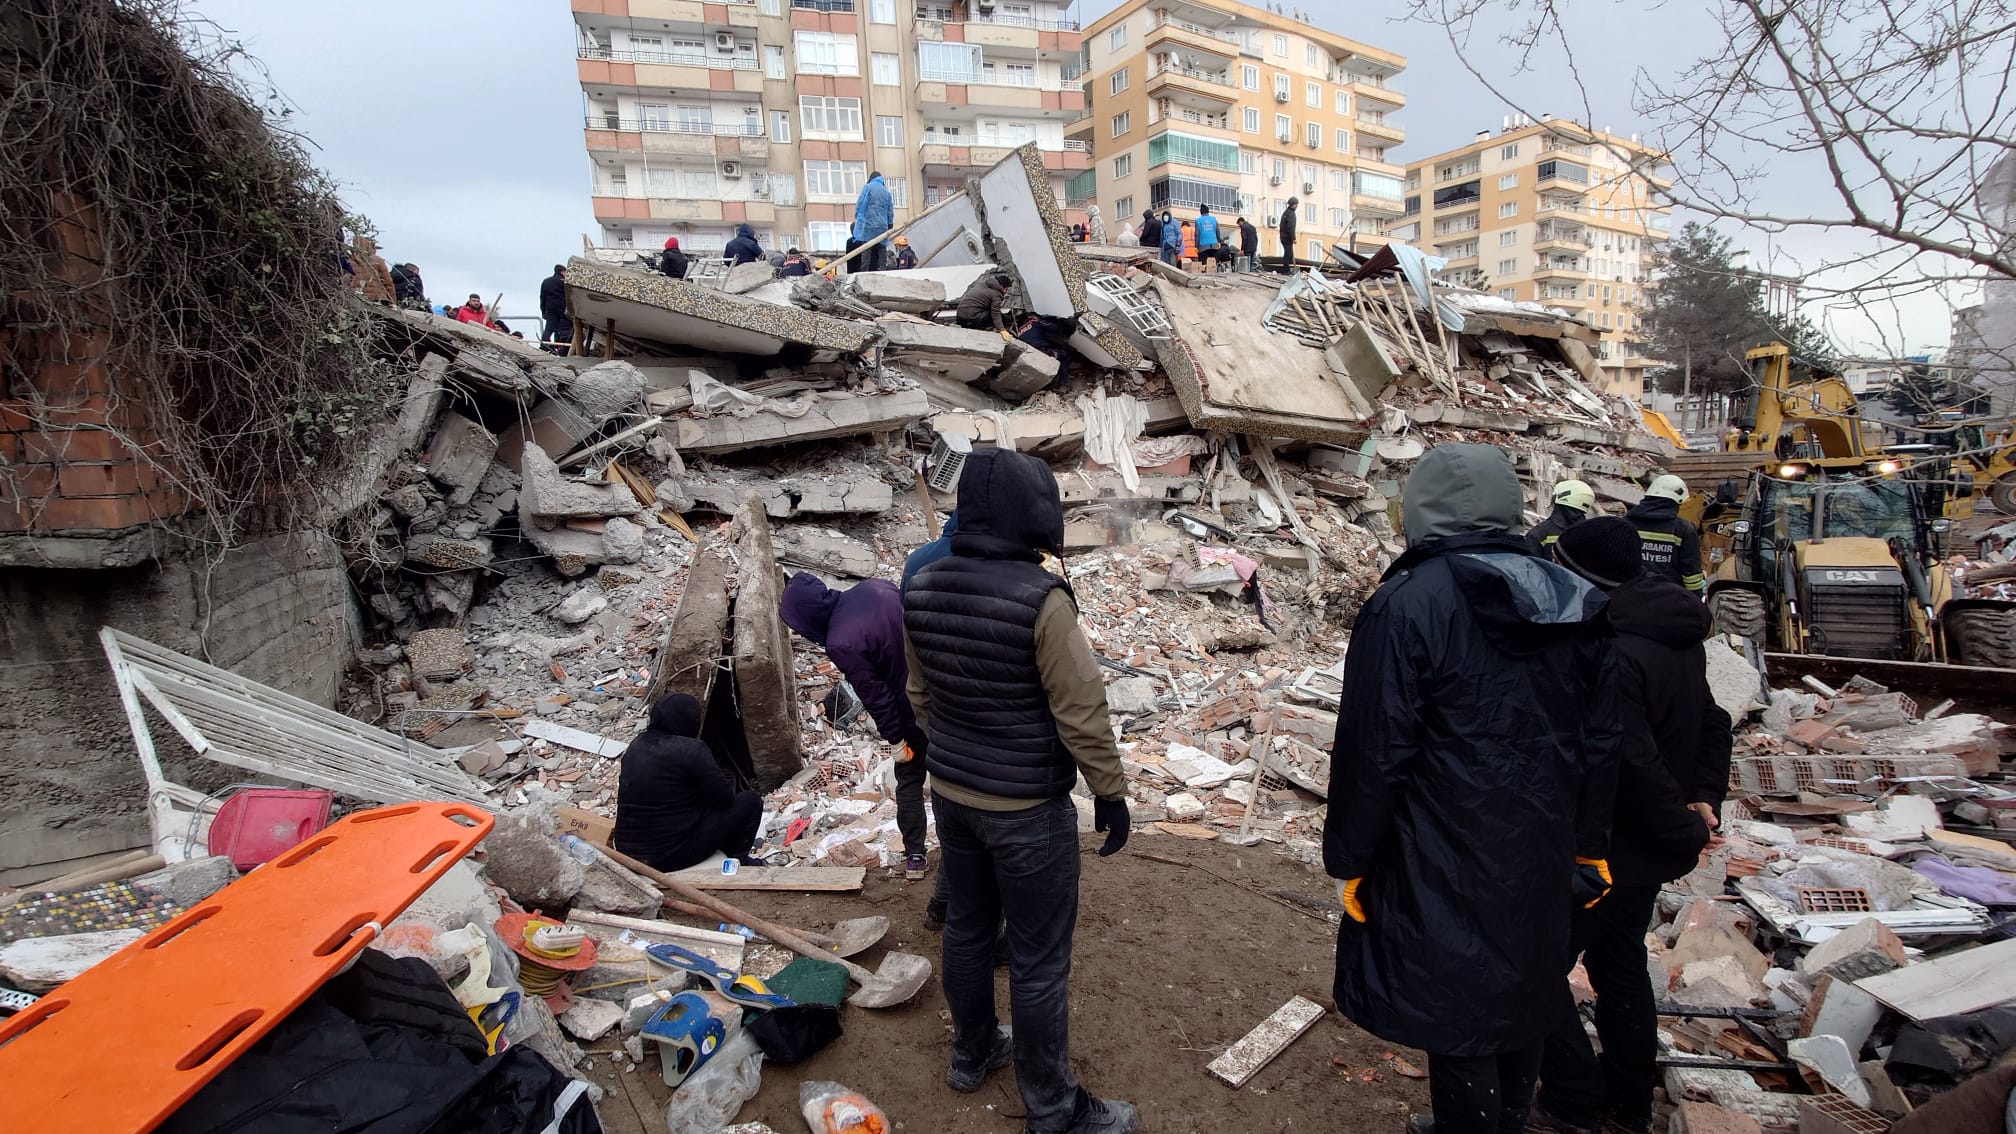 The wreckage of a collapsed building in Diyarbakır, Turkey.